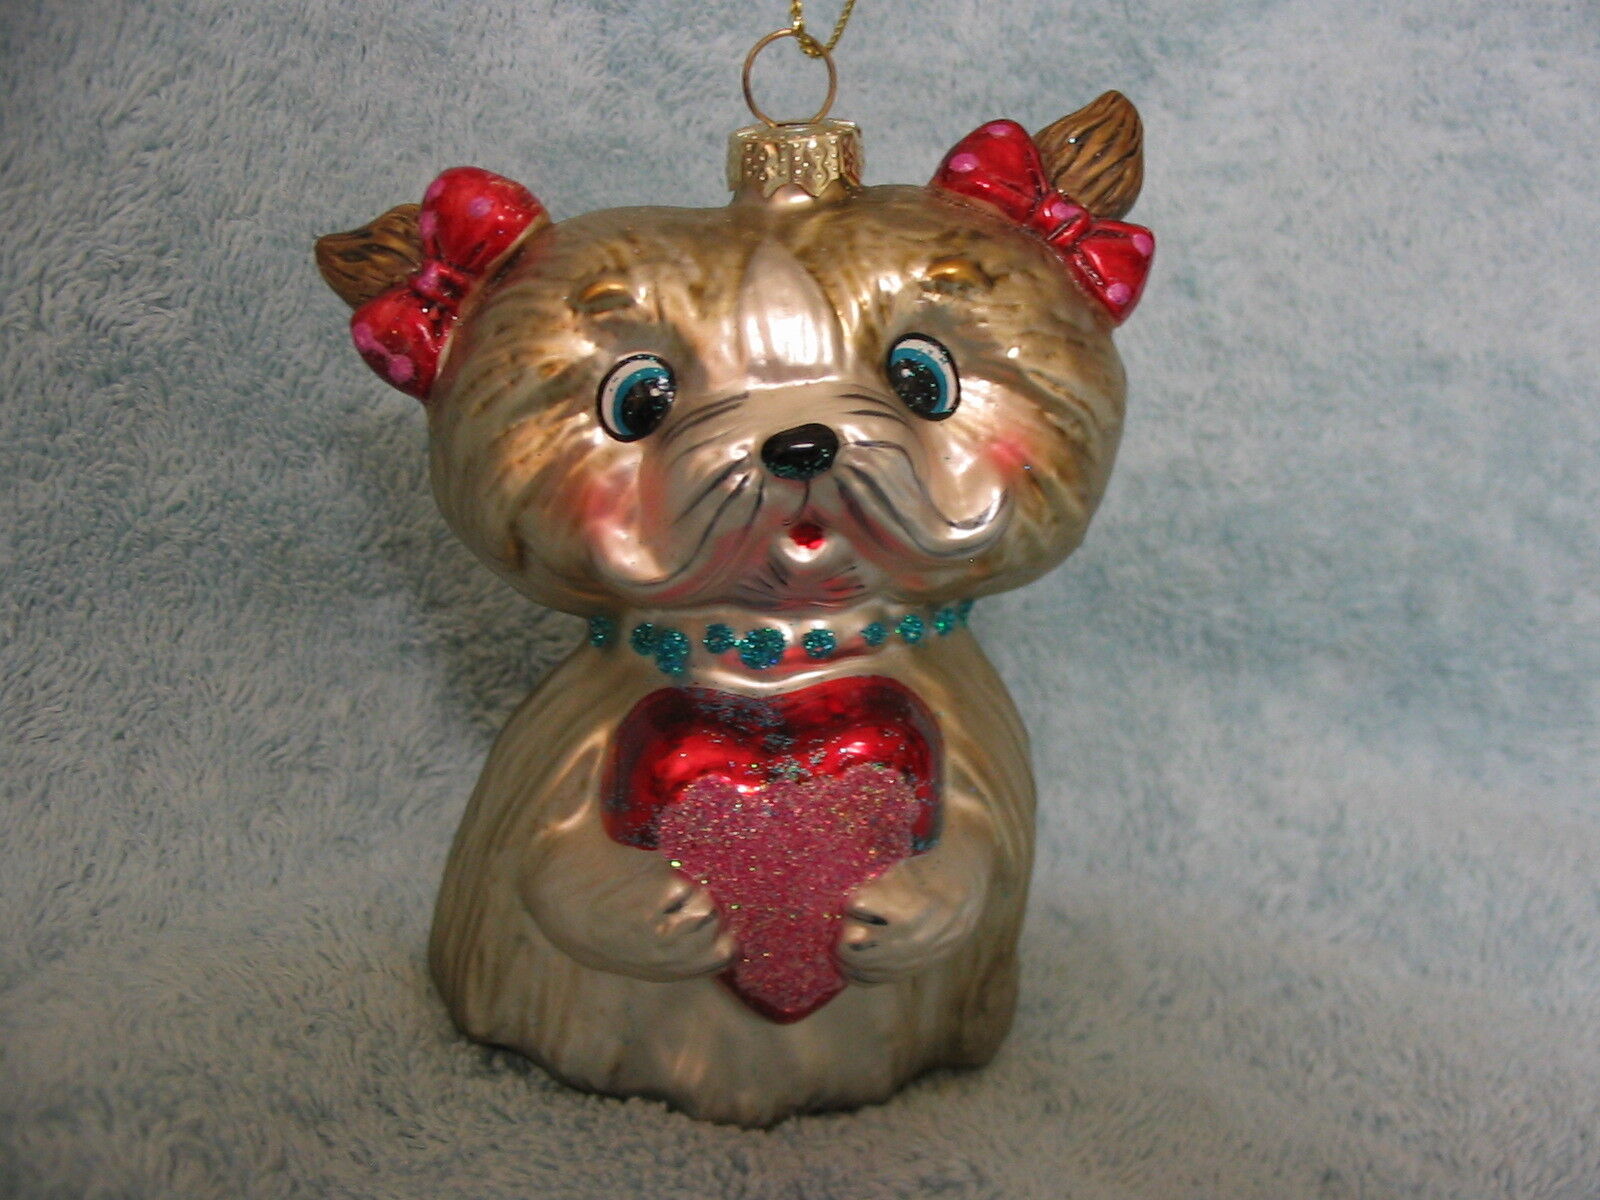 Kitty Cat w Jeweled Collar Glass Ornament - Red Hair Bows and Glitter Heart